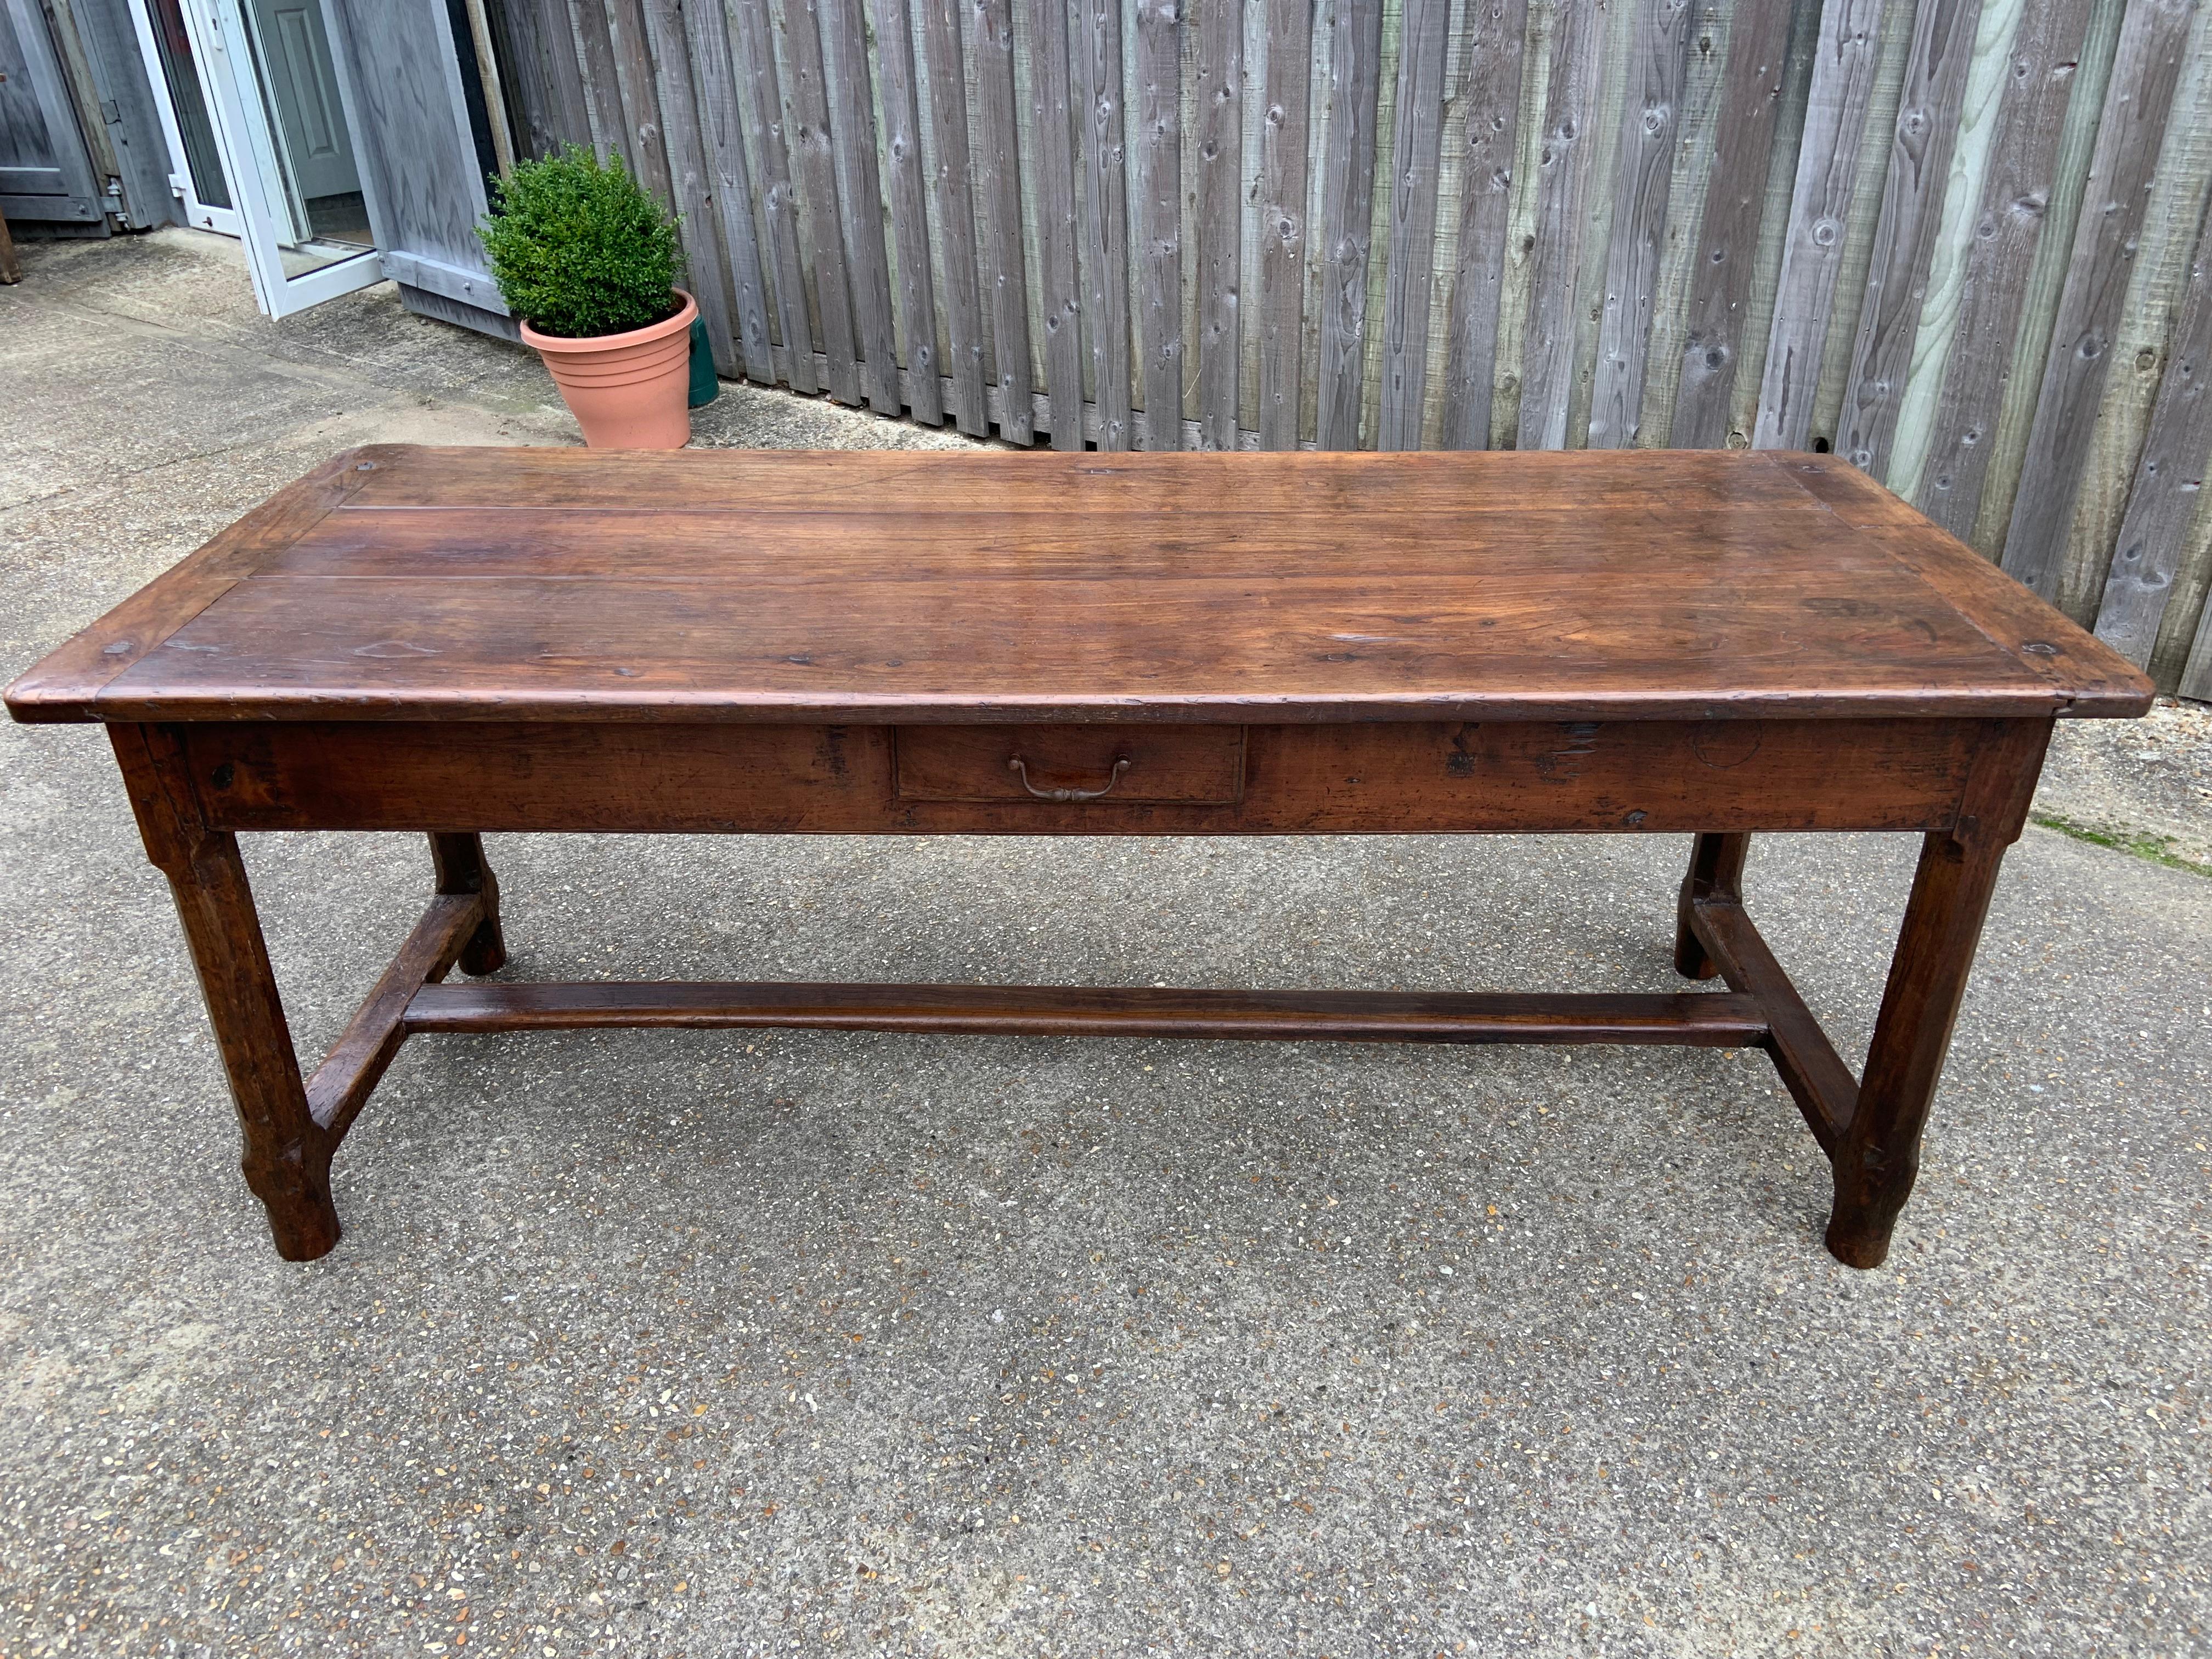 18th century Cherry farmhouse table with wonderful patination. The table sits on a sturdy apron and has a centre stretcher. The table has two gorgeous drawers.